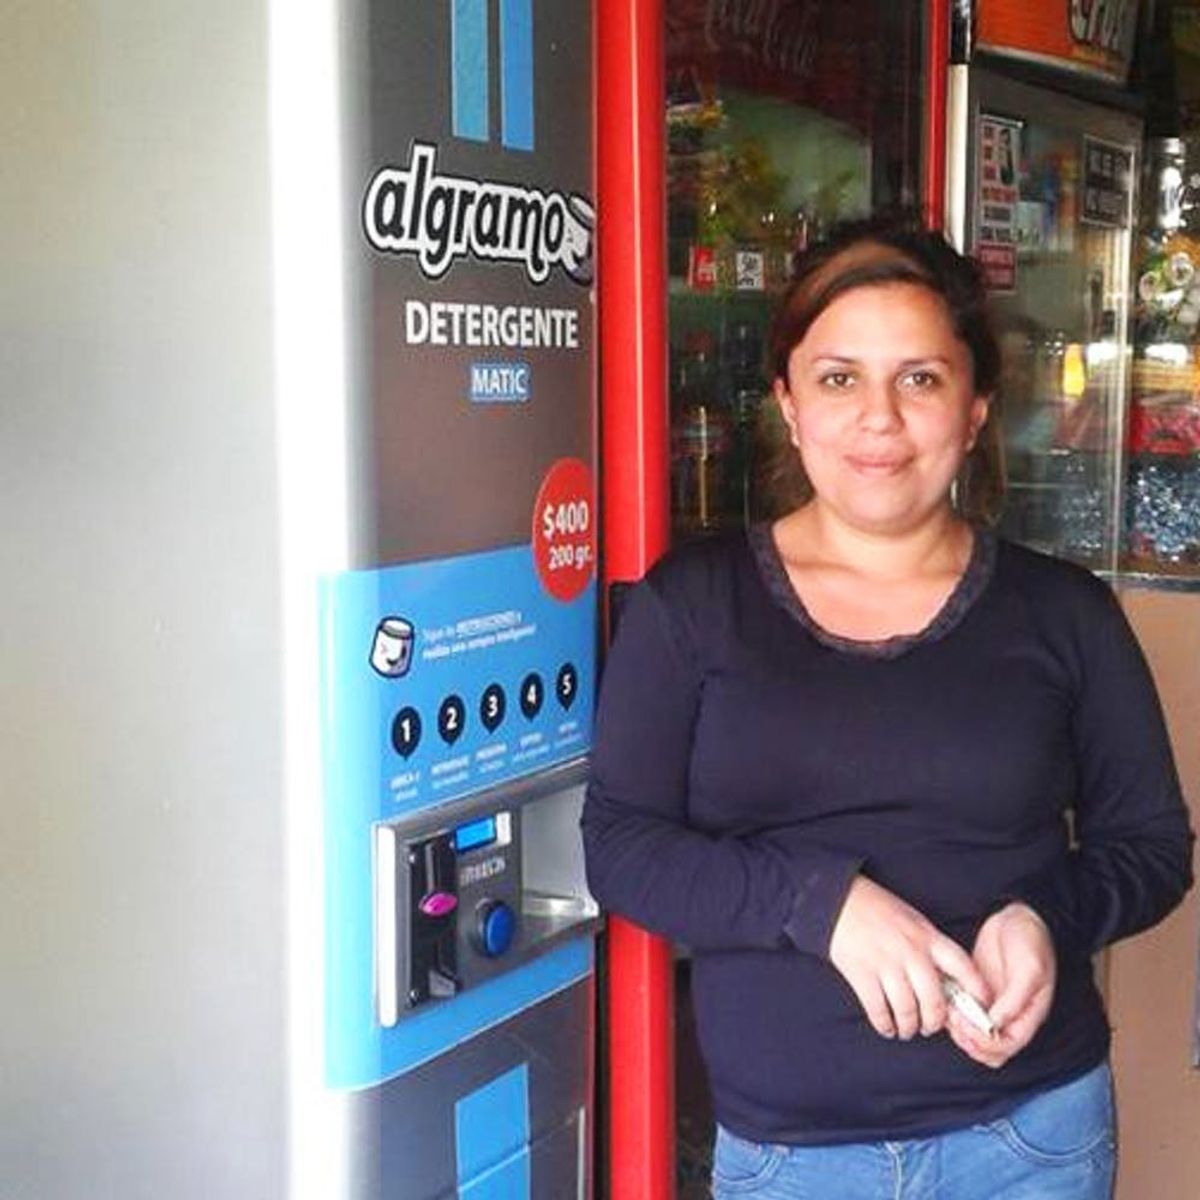 This Vending Machine Could Feed People Living on $4 a Day